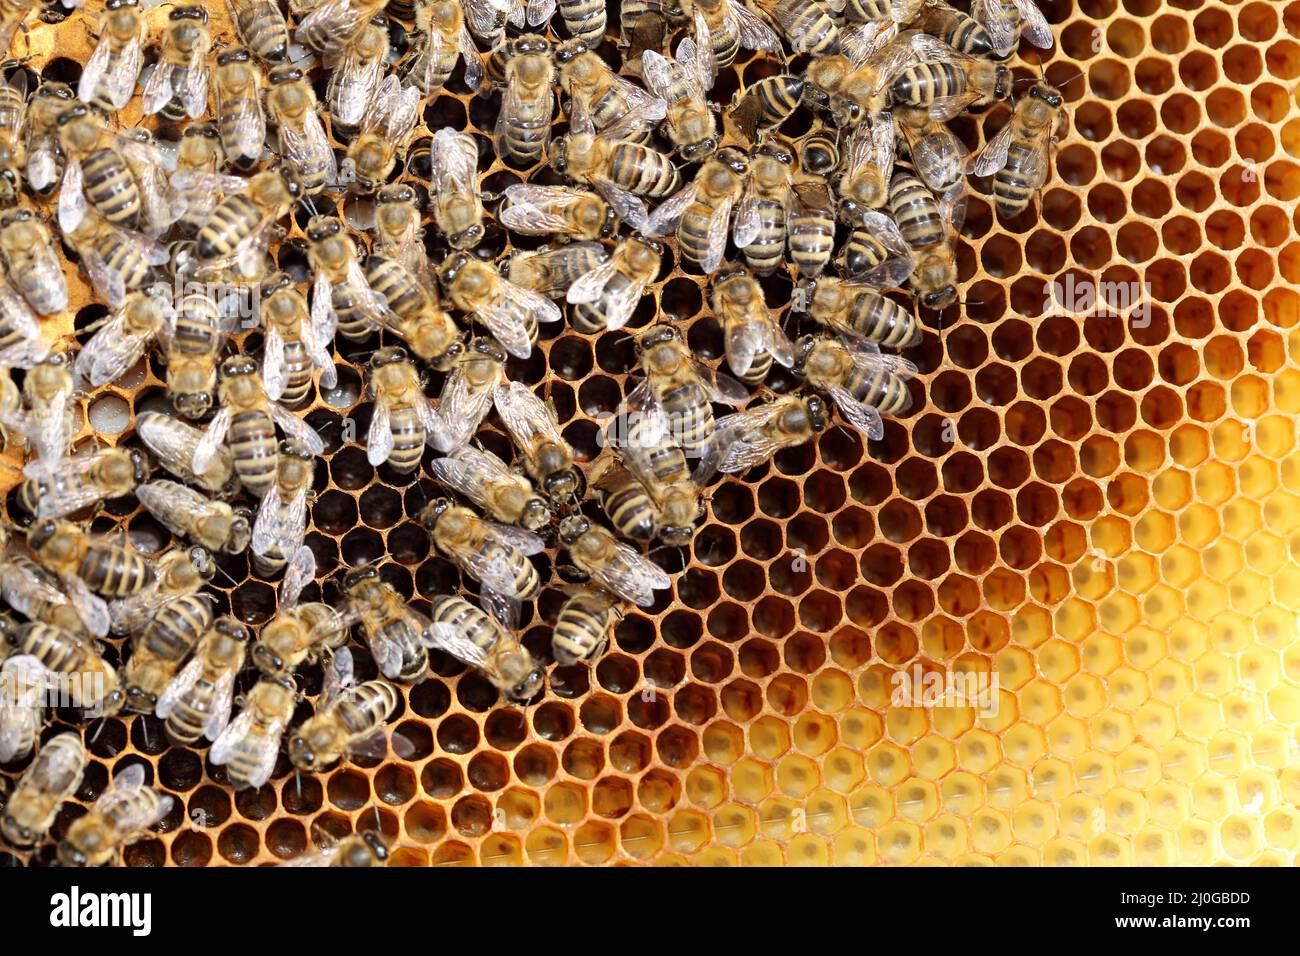 Some honey bees on a beeswax Stock Photo